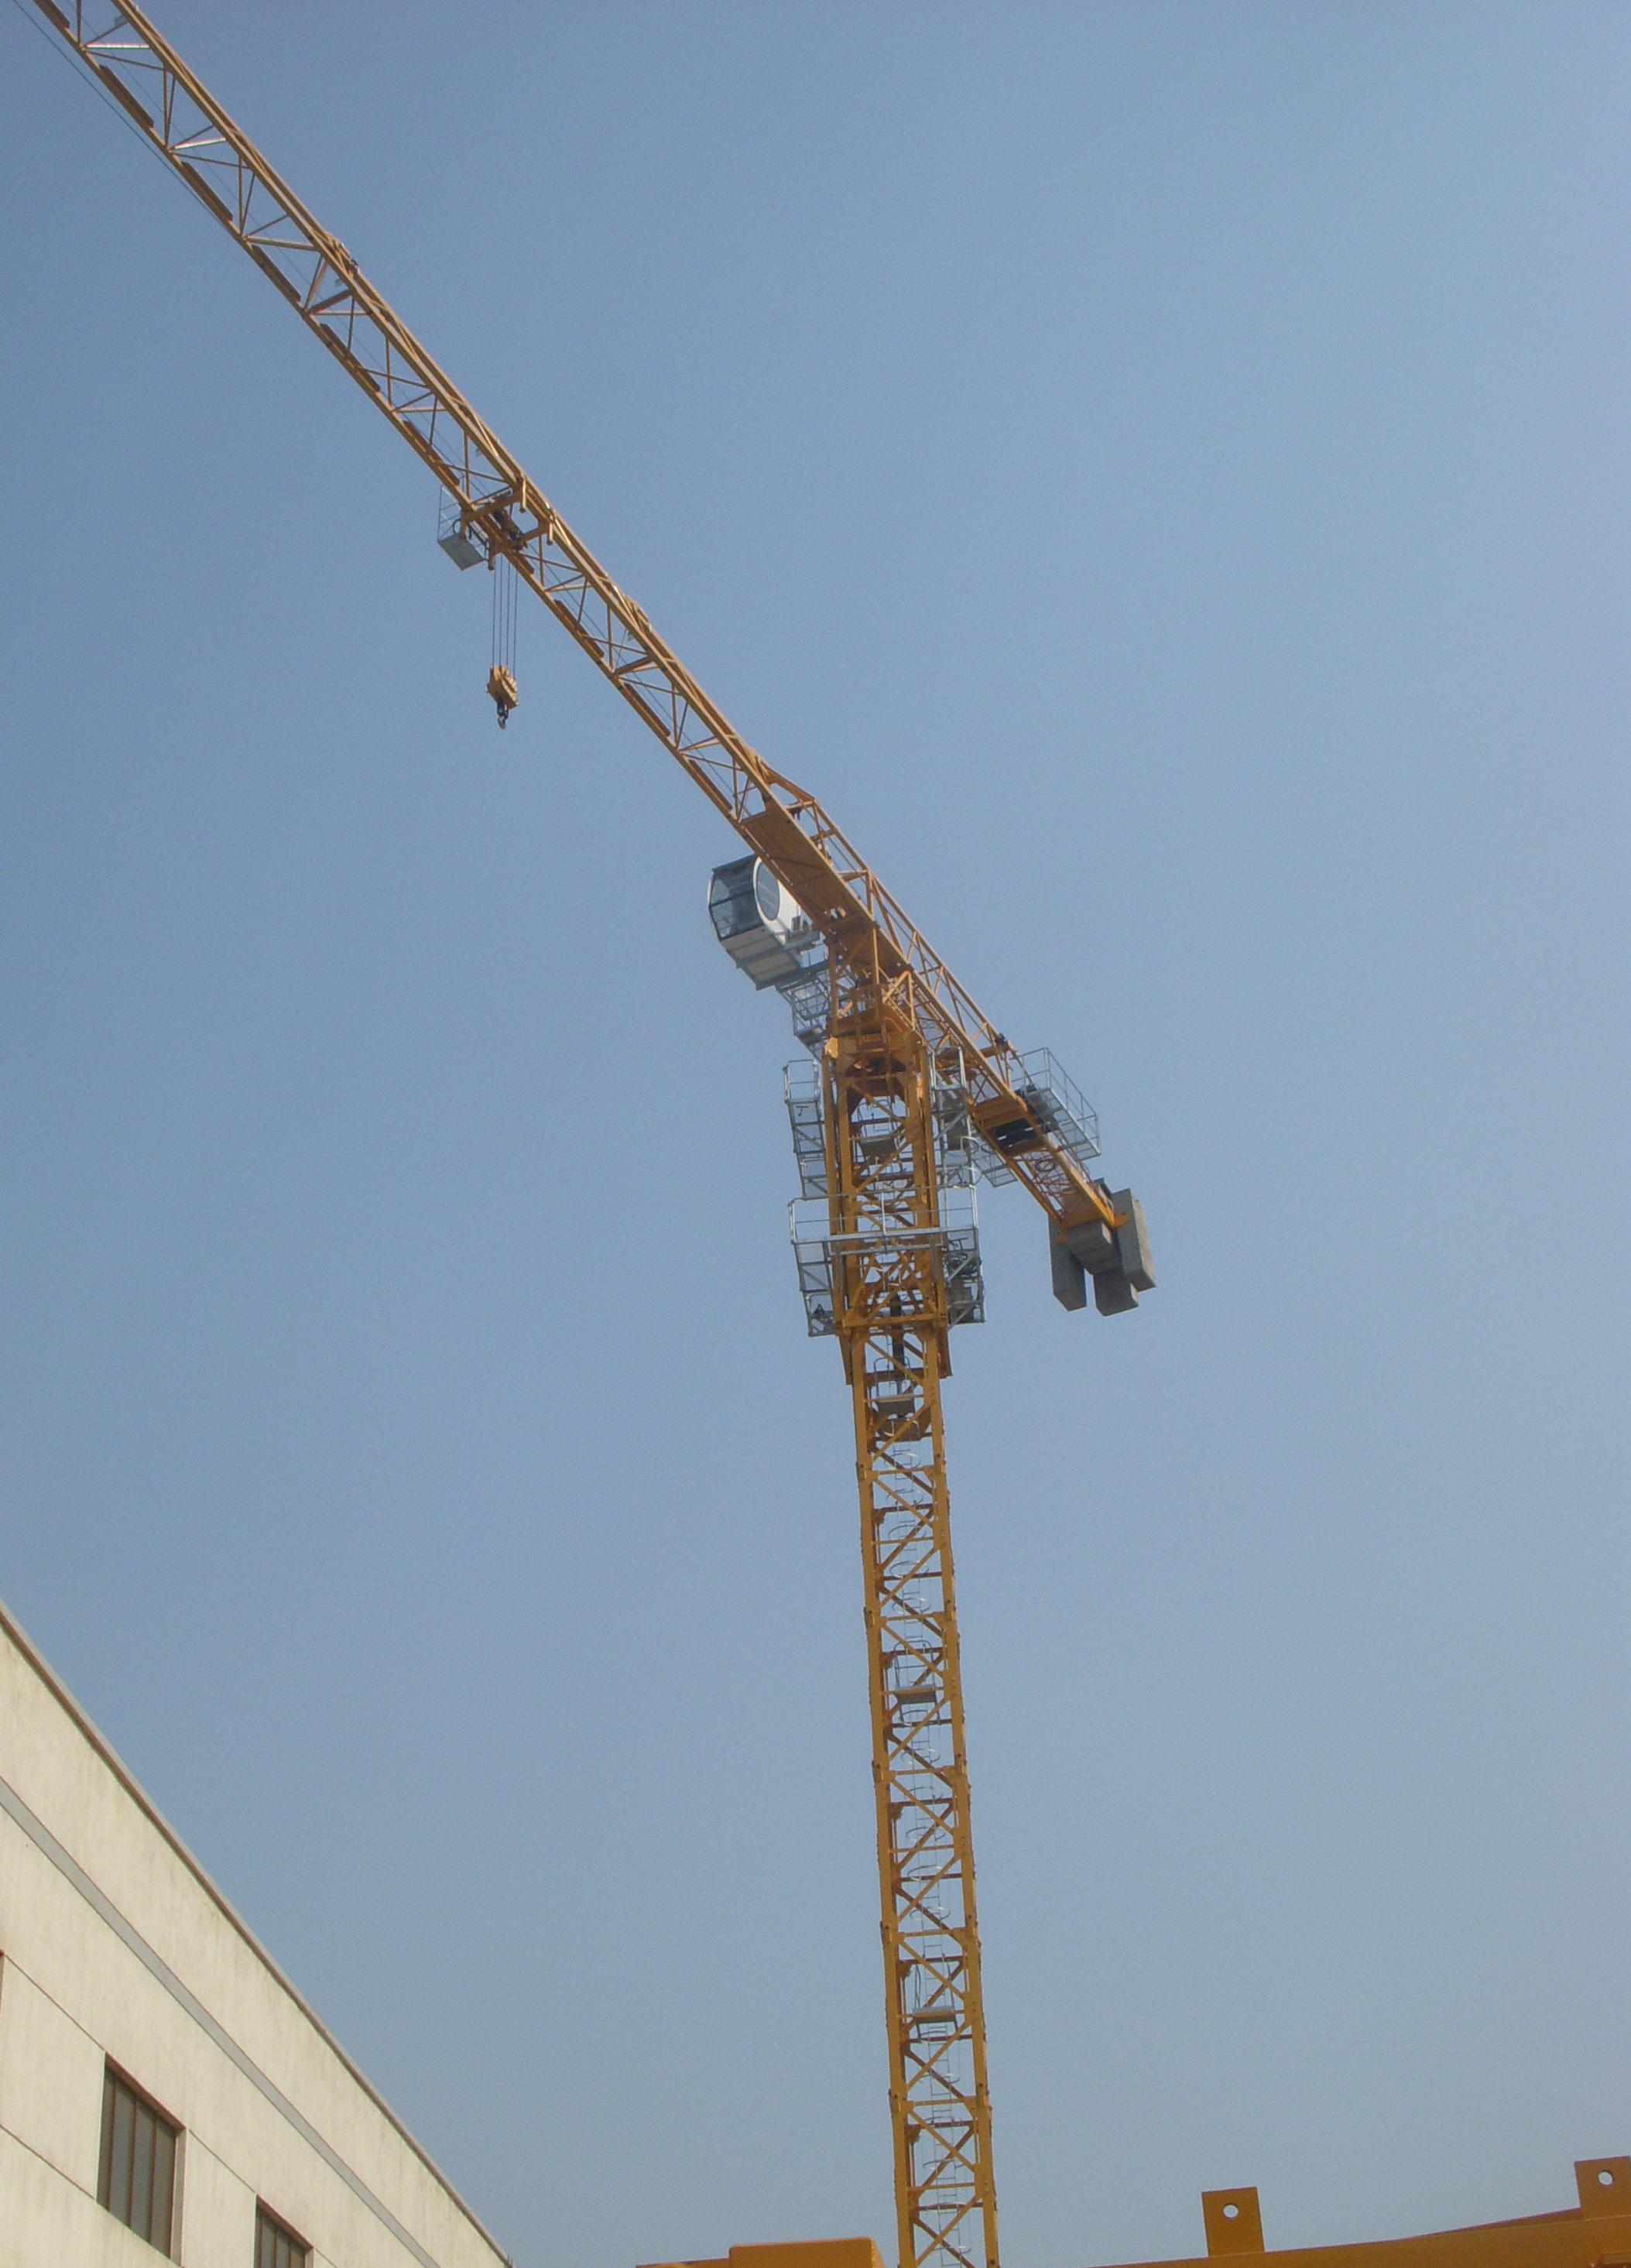 Topless Tower Crane SLP5510 safe and reliable with less malfunctions